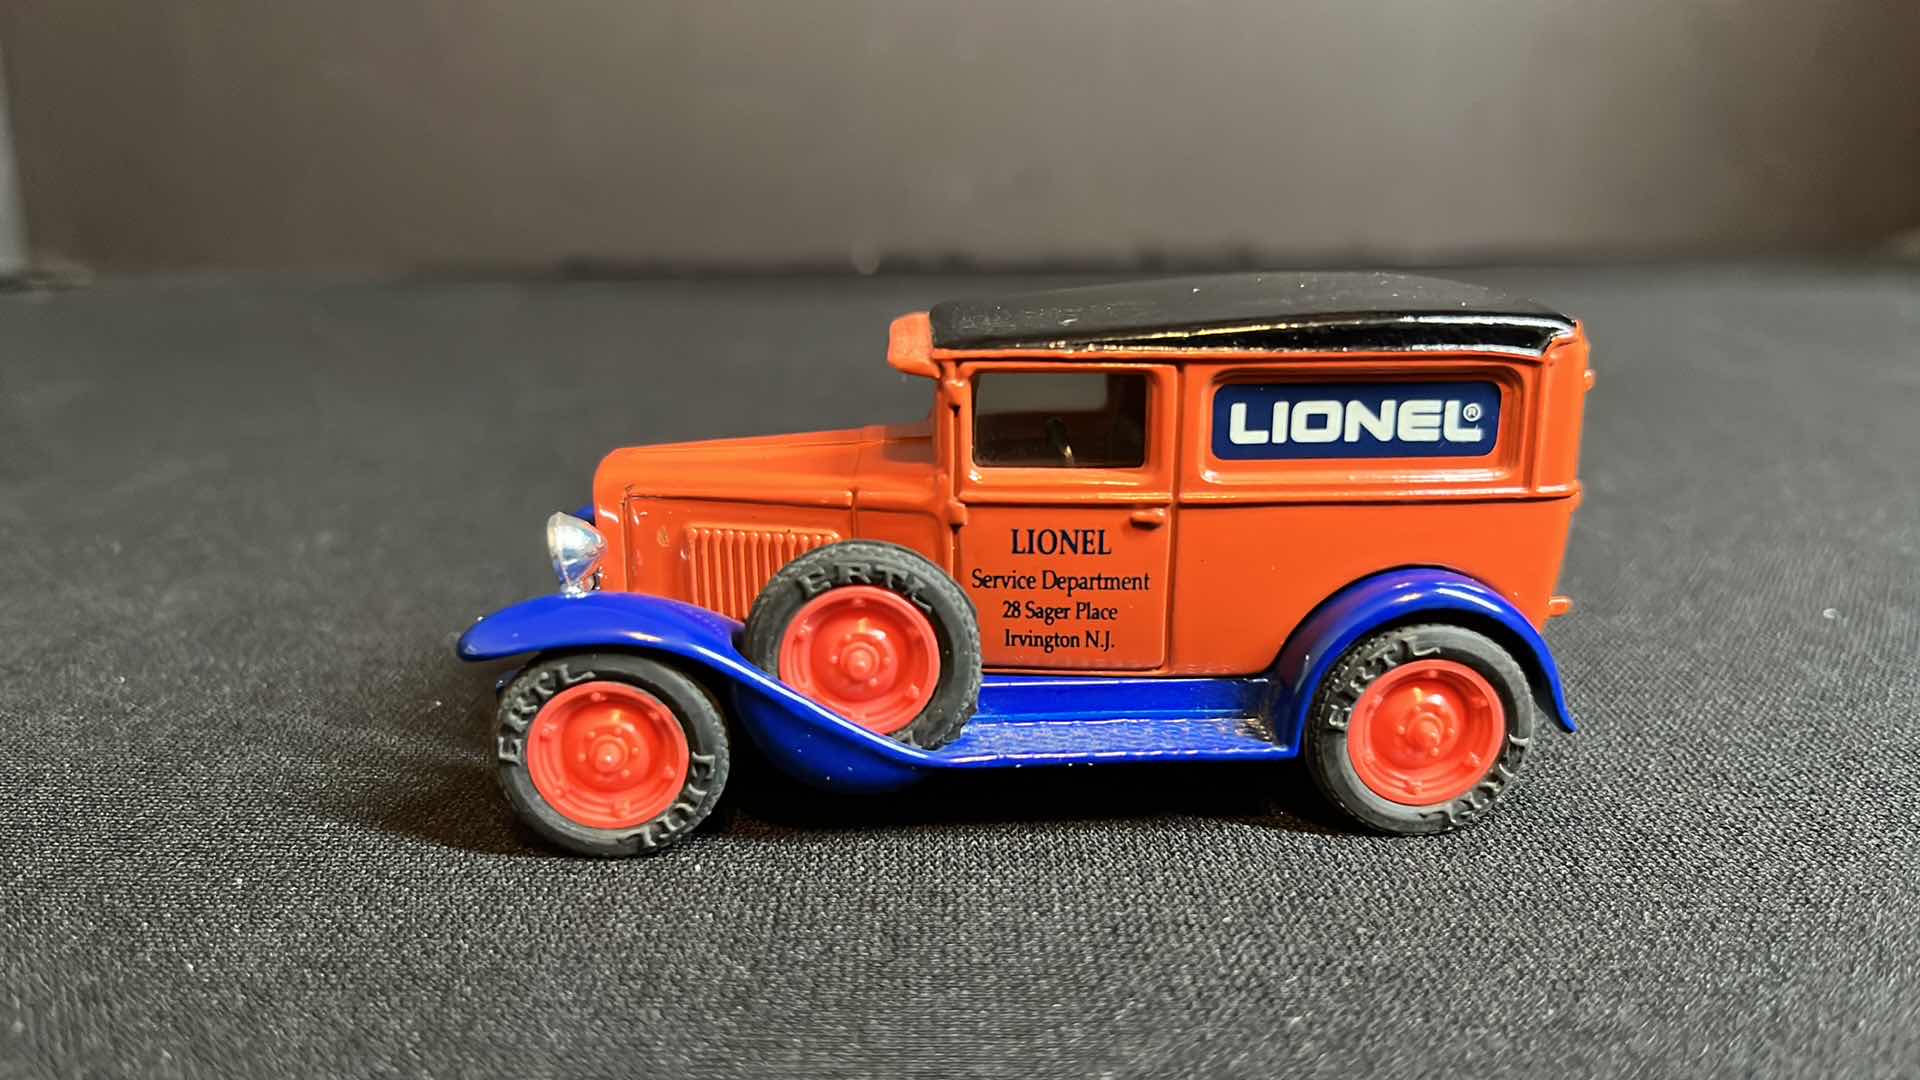 Photo 7 of NIB ERTL COMPANY EASTWOOD AUTOMOBILIA SET OF DIE-CAST METAL LIONEL SERVICE DEPT 1930 SERIES AD 1/2 TON DELUXE DELIVERY TRUCK & LIONEL ELECTRIC TRAINS 1930 CHEVROLET DELIVERY TRUCK, 1993 (STOCK #3522)